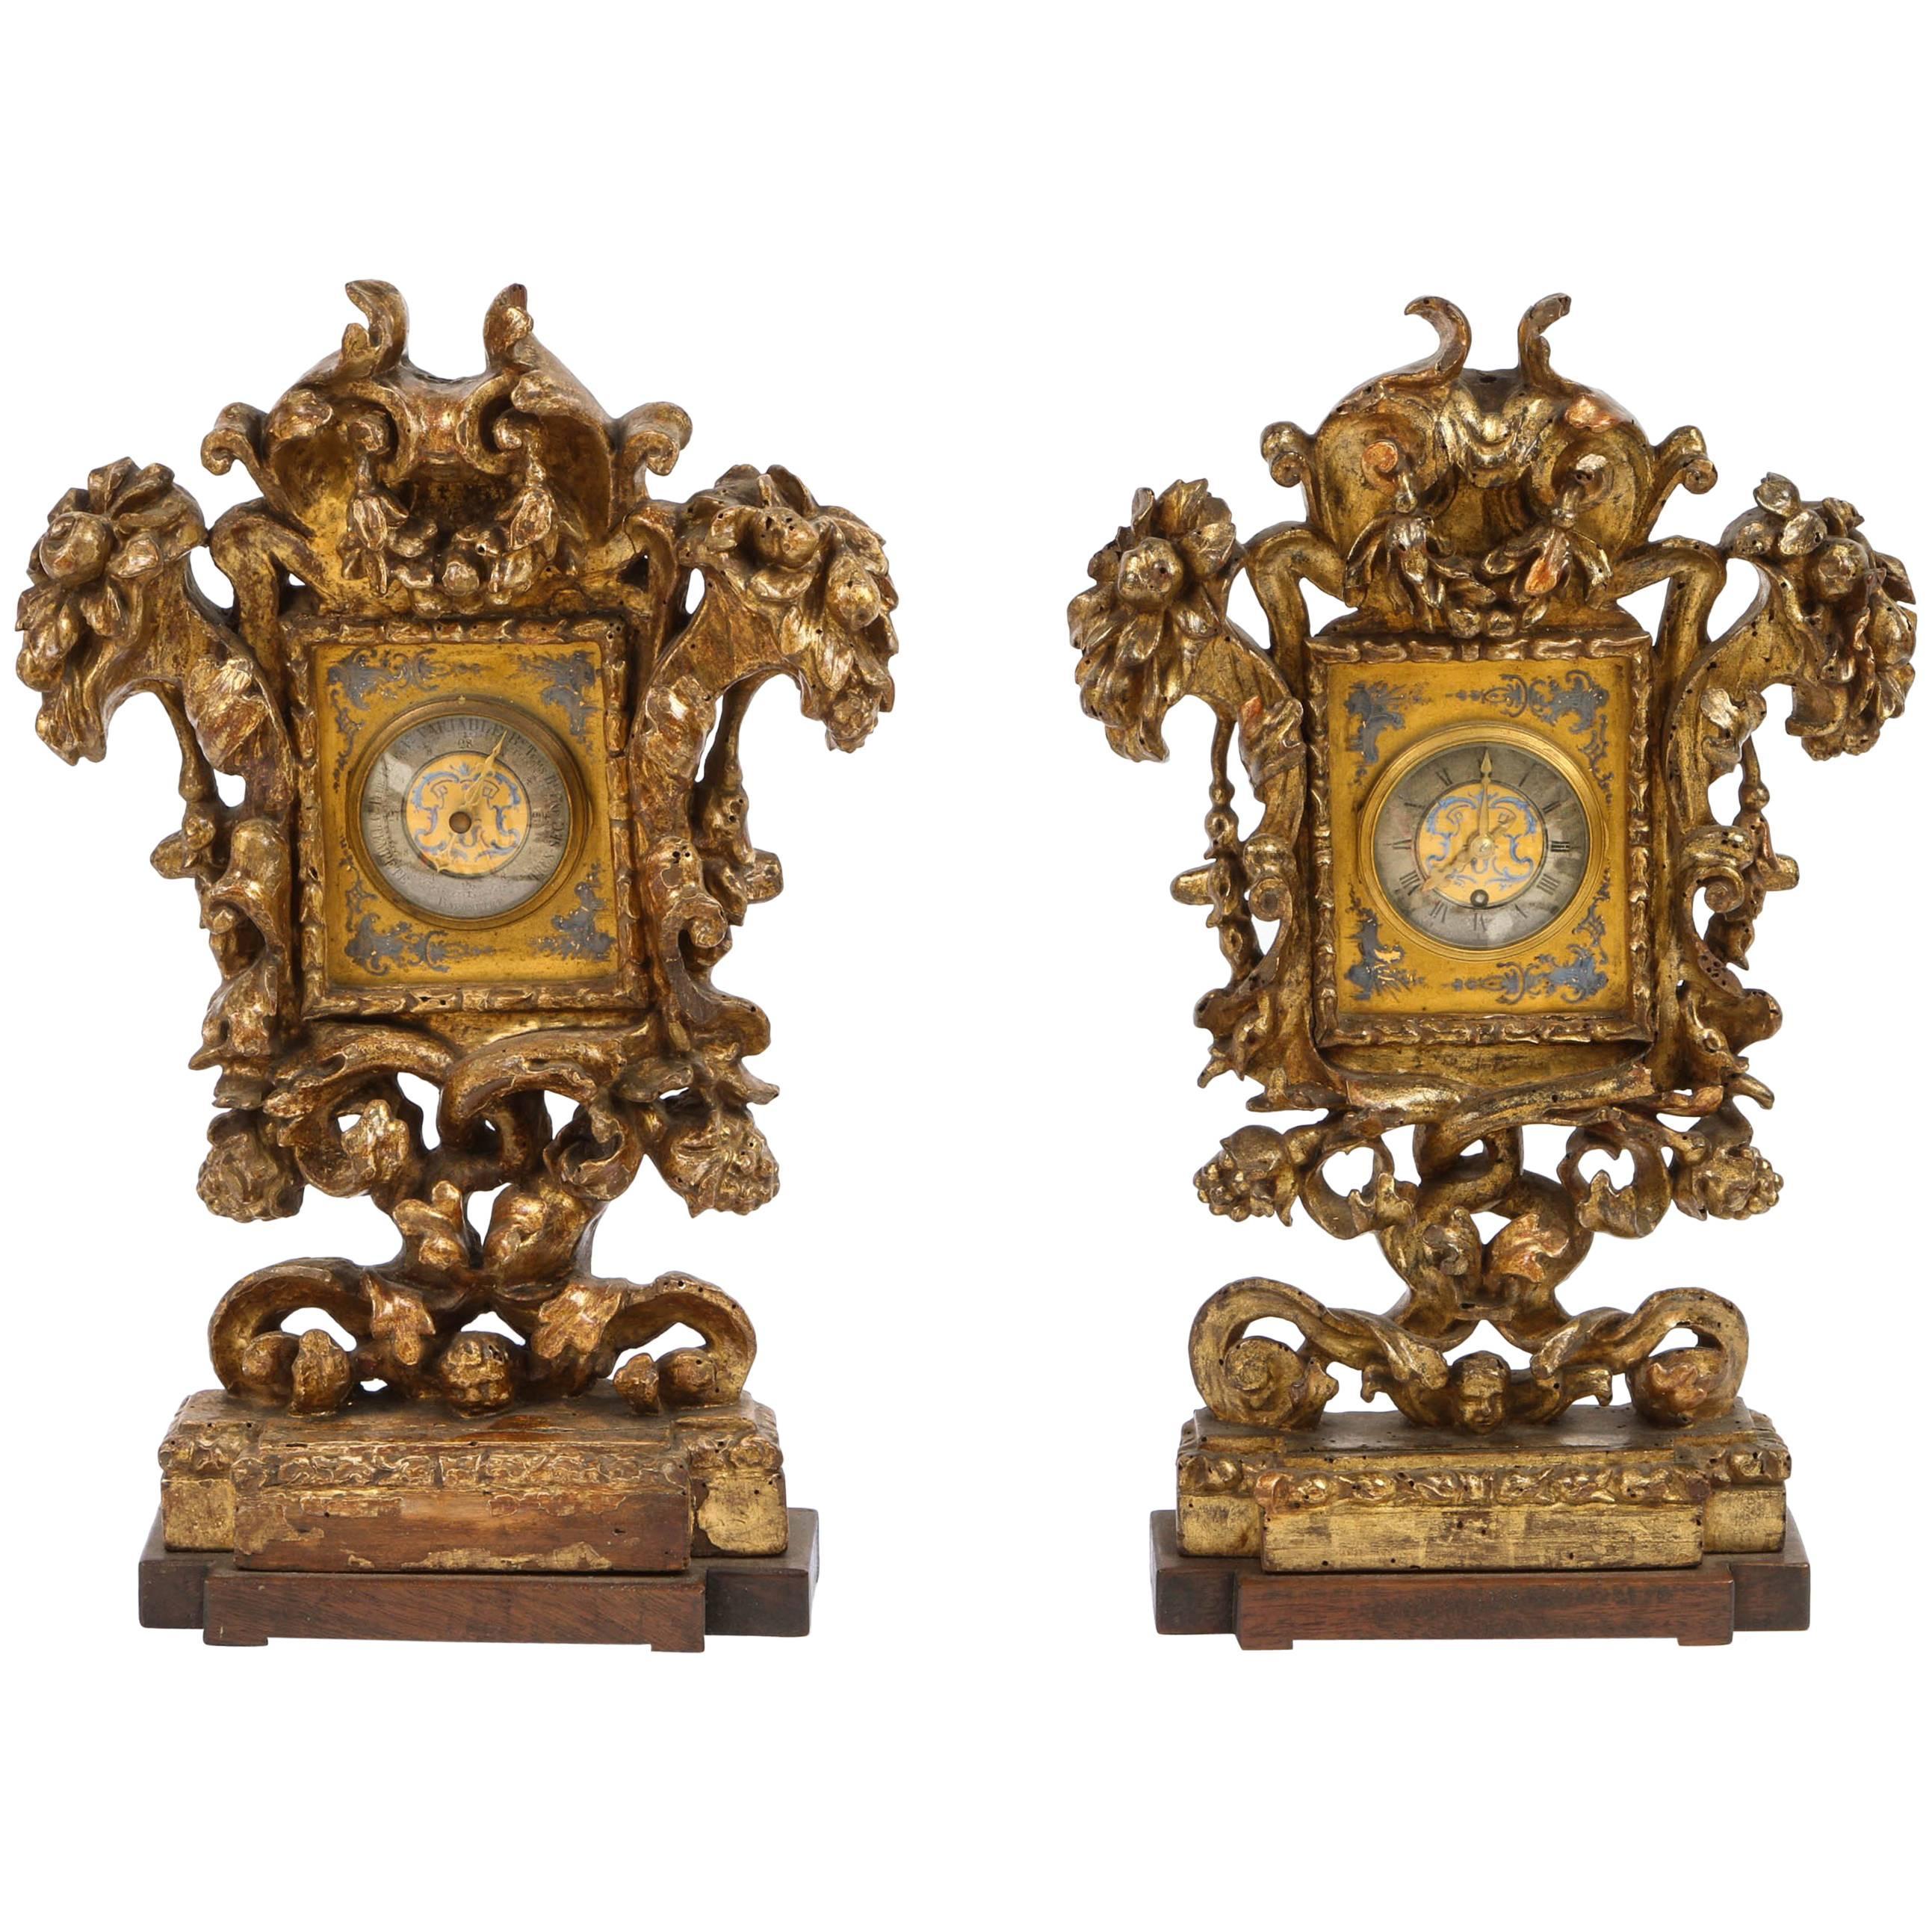 Pair of 18th century Italian Clock and Barometer For Sale